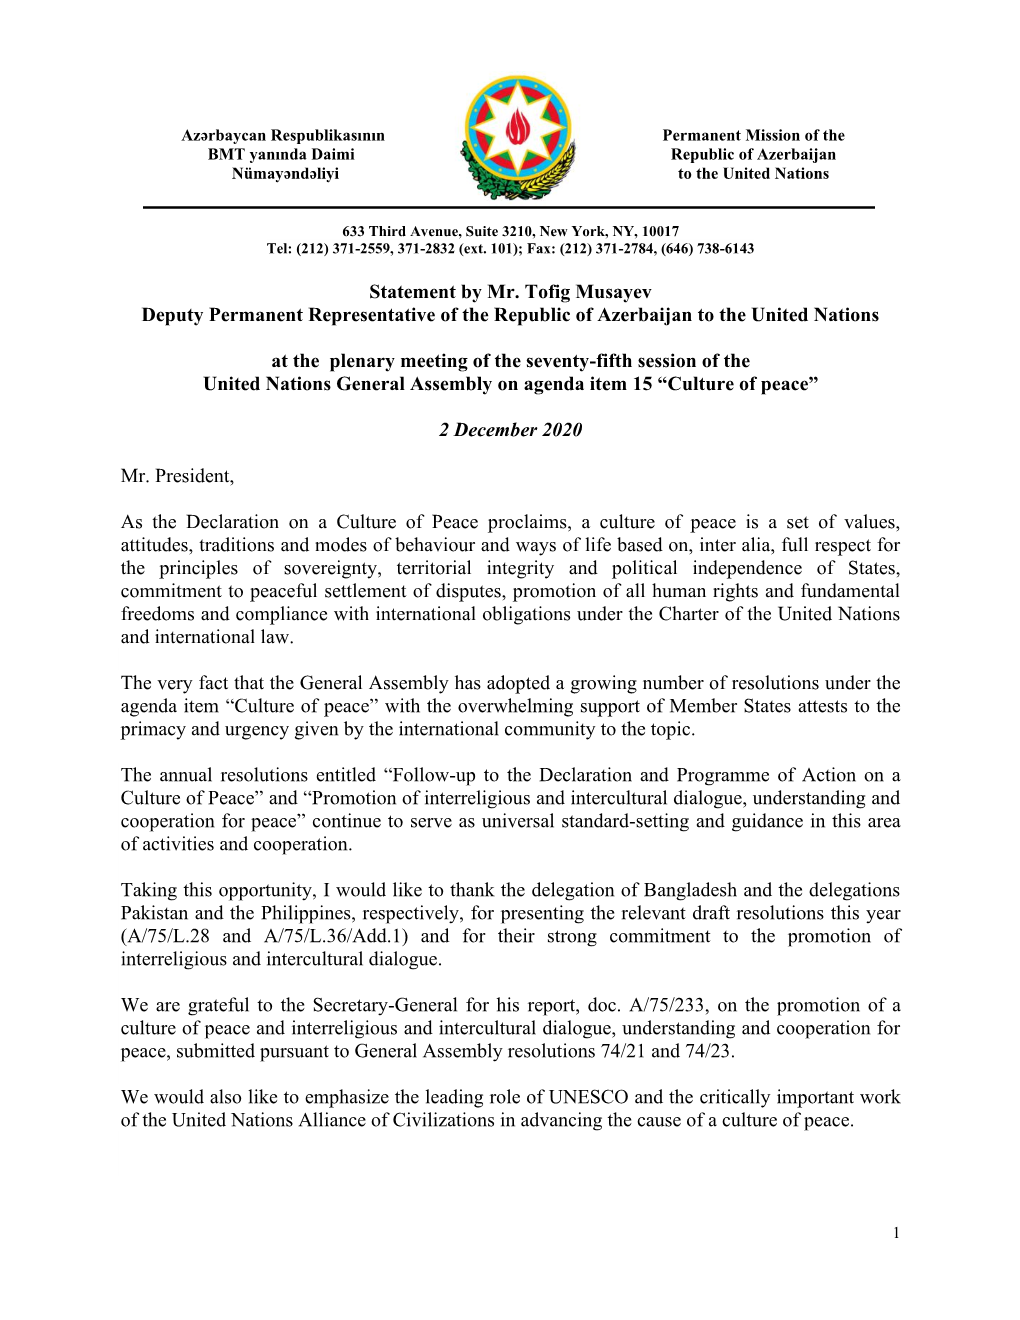 Statement by Mr. Tofig Musayev Deputy Permanent Representative of the Republic of Azerbaijan to the United Nations at the Plen